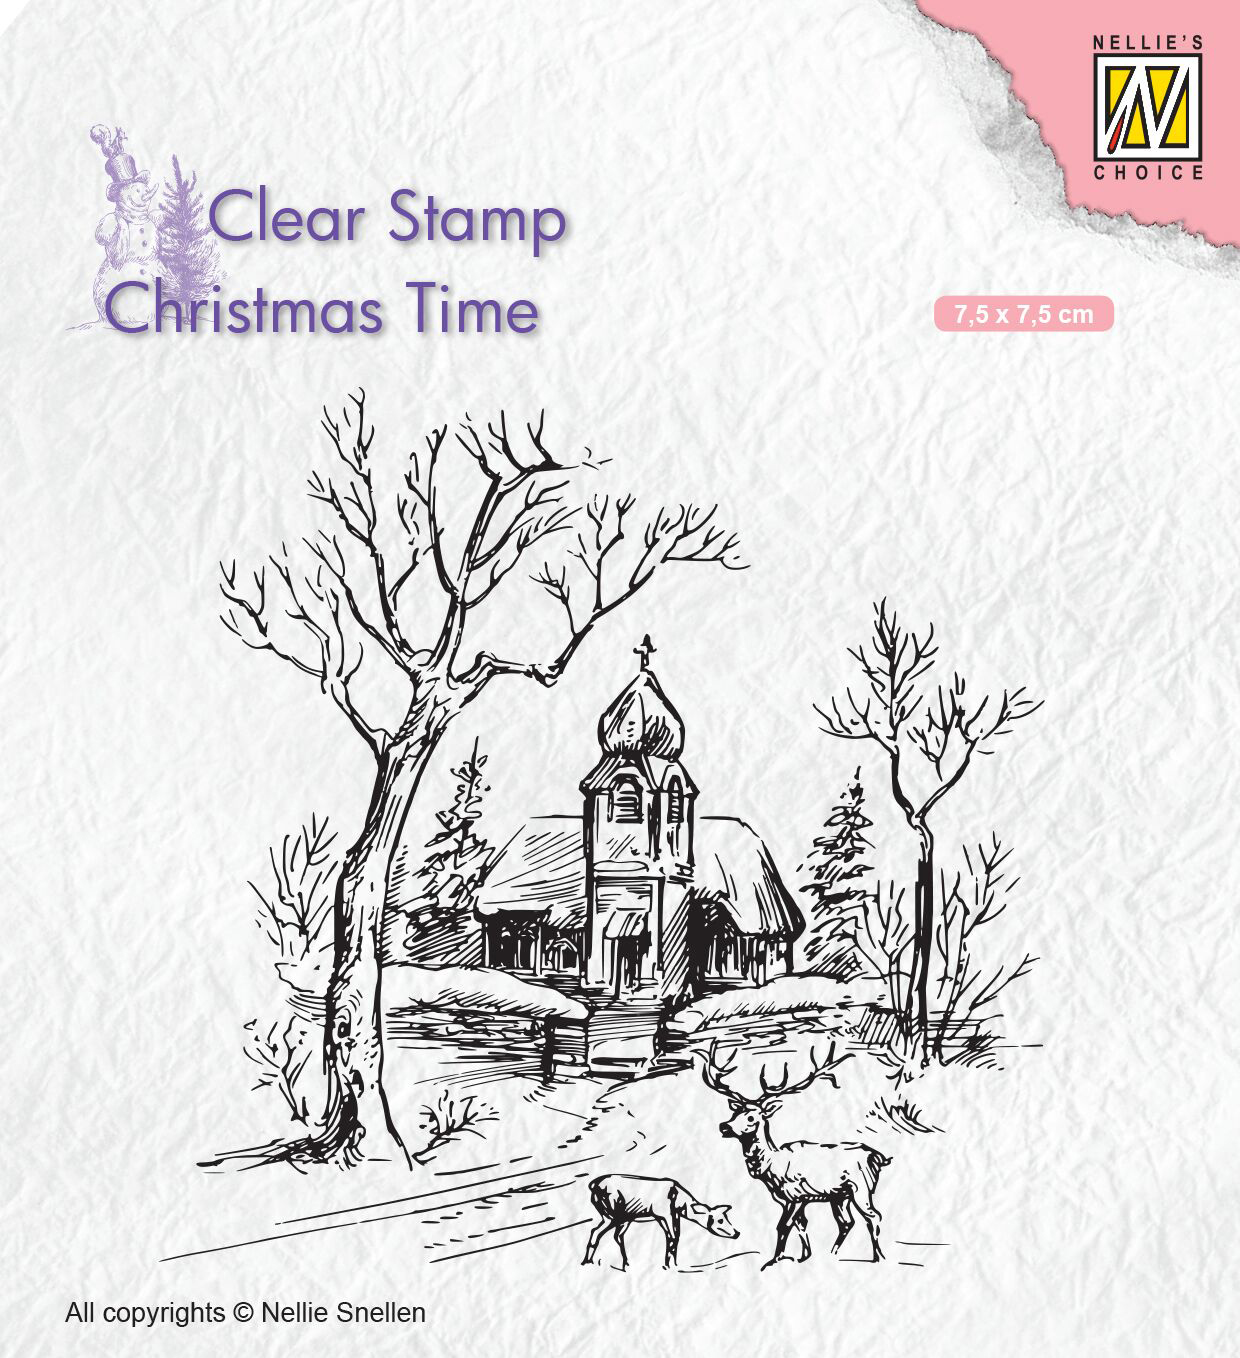 Nellie Snellen Clear Stamp Christmas Time - Wintery Scene with Church & Reindeer